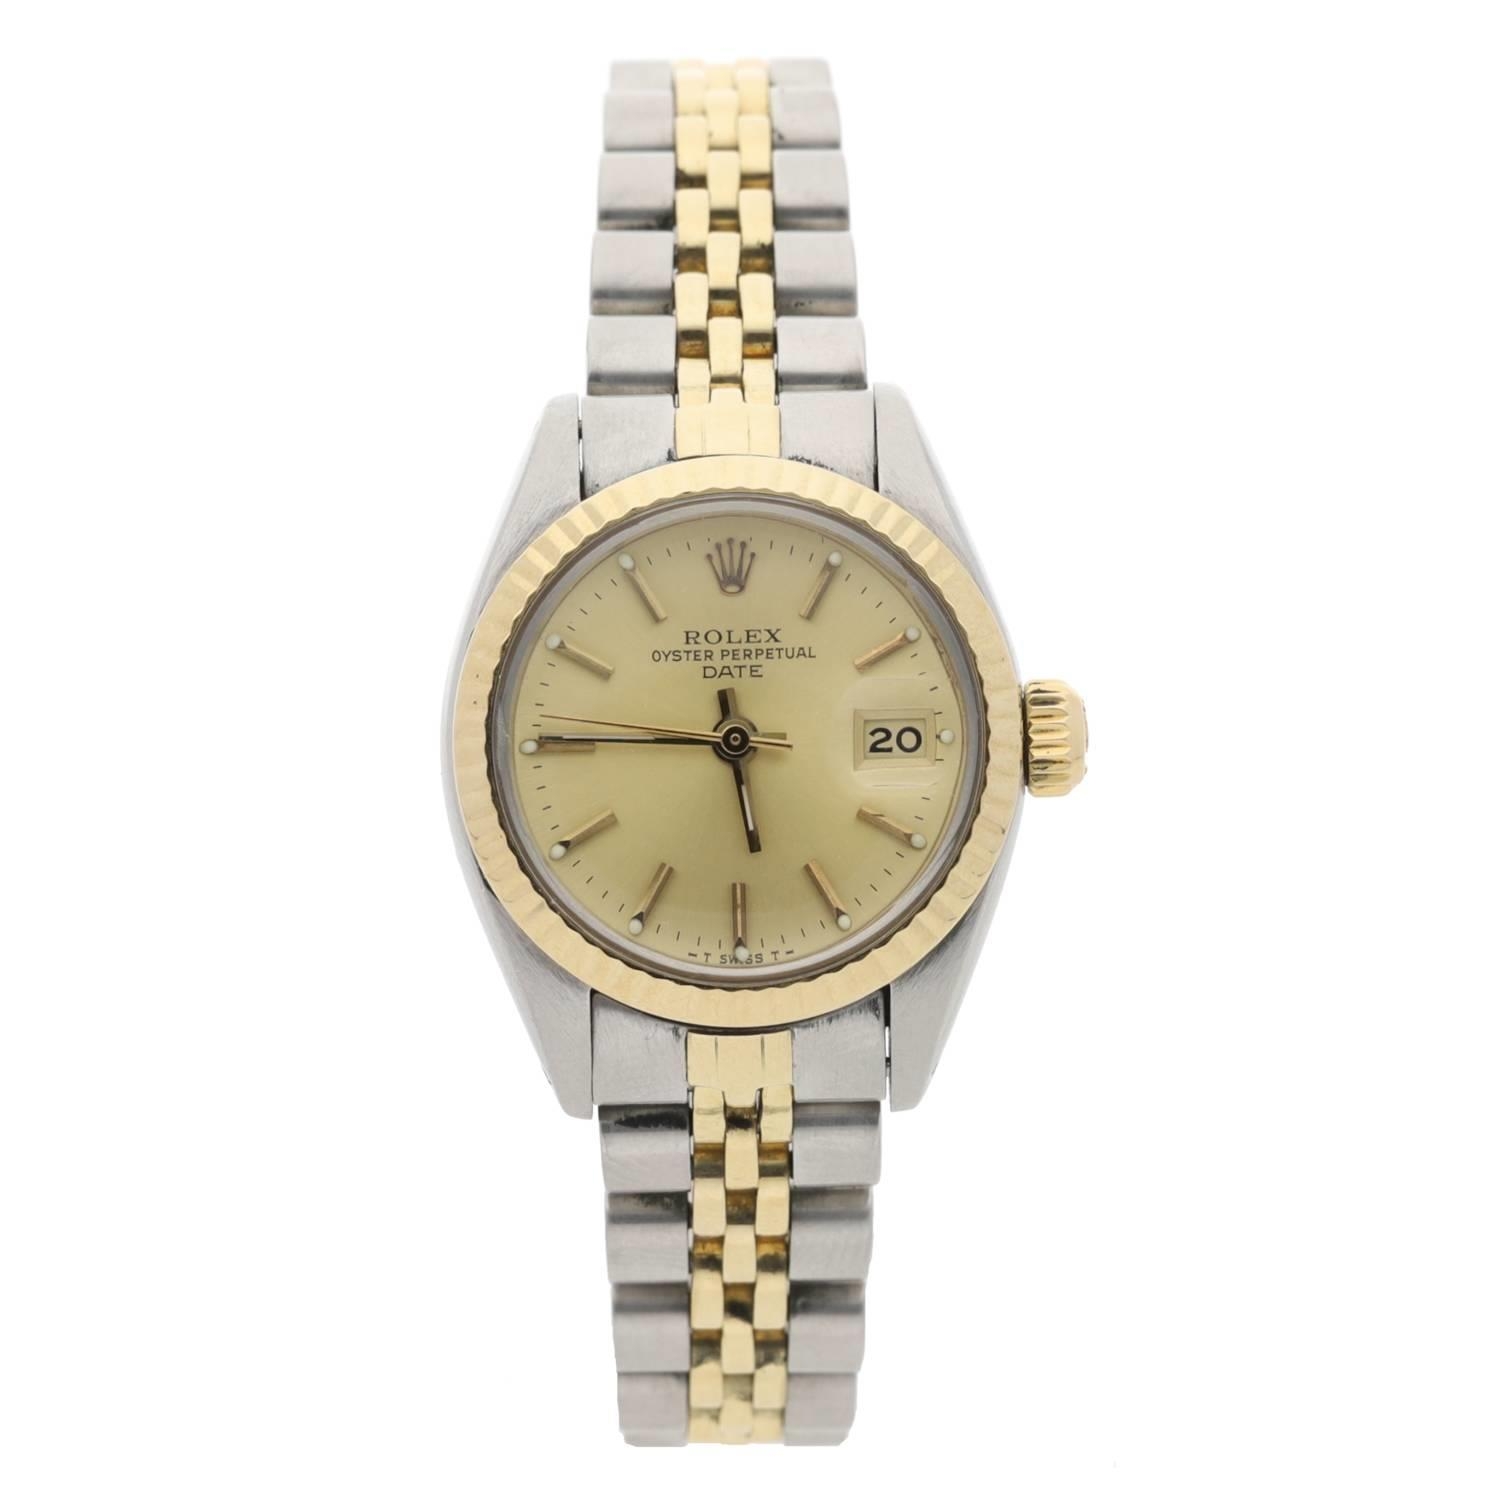 Rolex Oyster Perpetual Datejust gold and stainless steel lady's wristwatch, reference no. 6917,